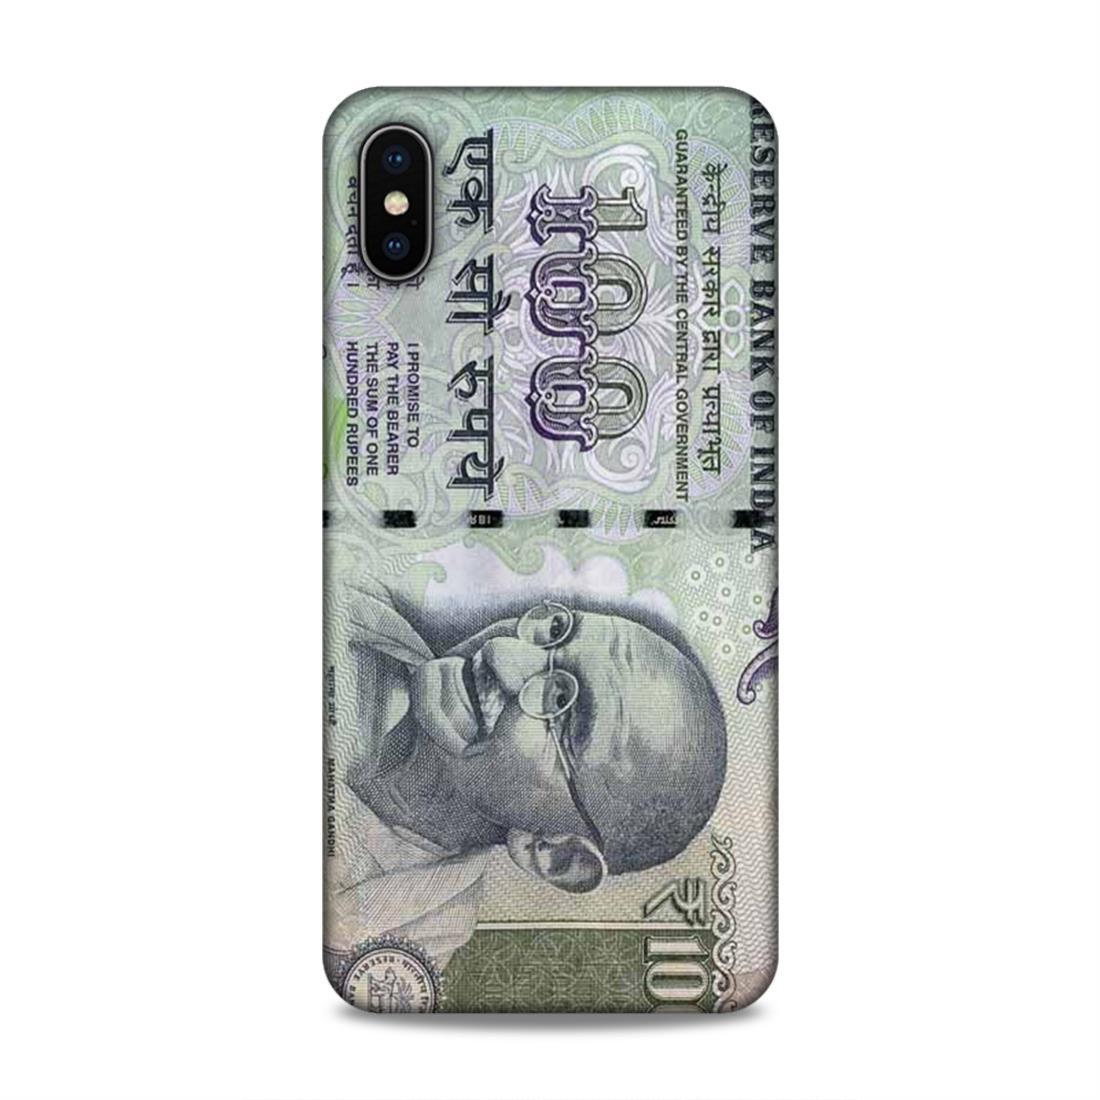 Rs 100 Currency Note iPhone XS Max Phone Cover Case